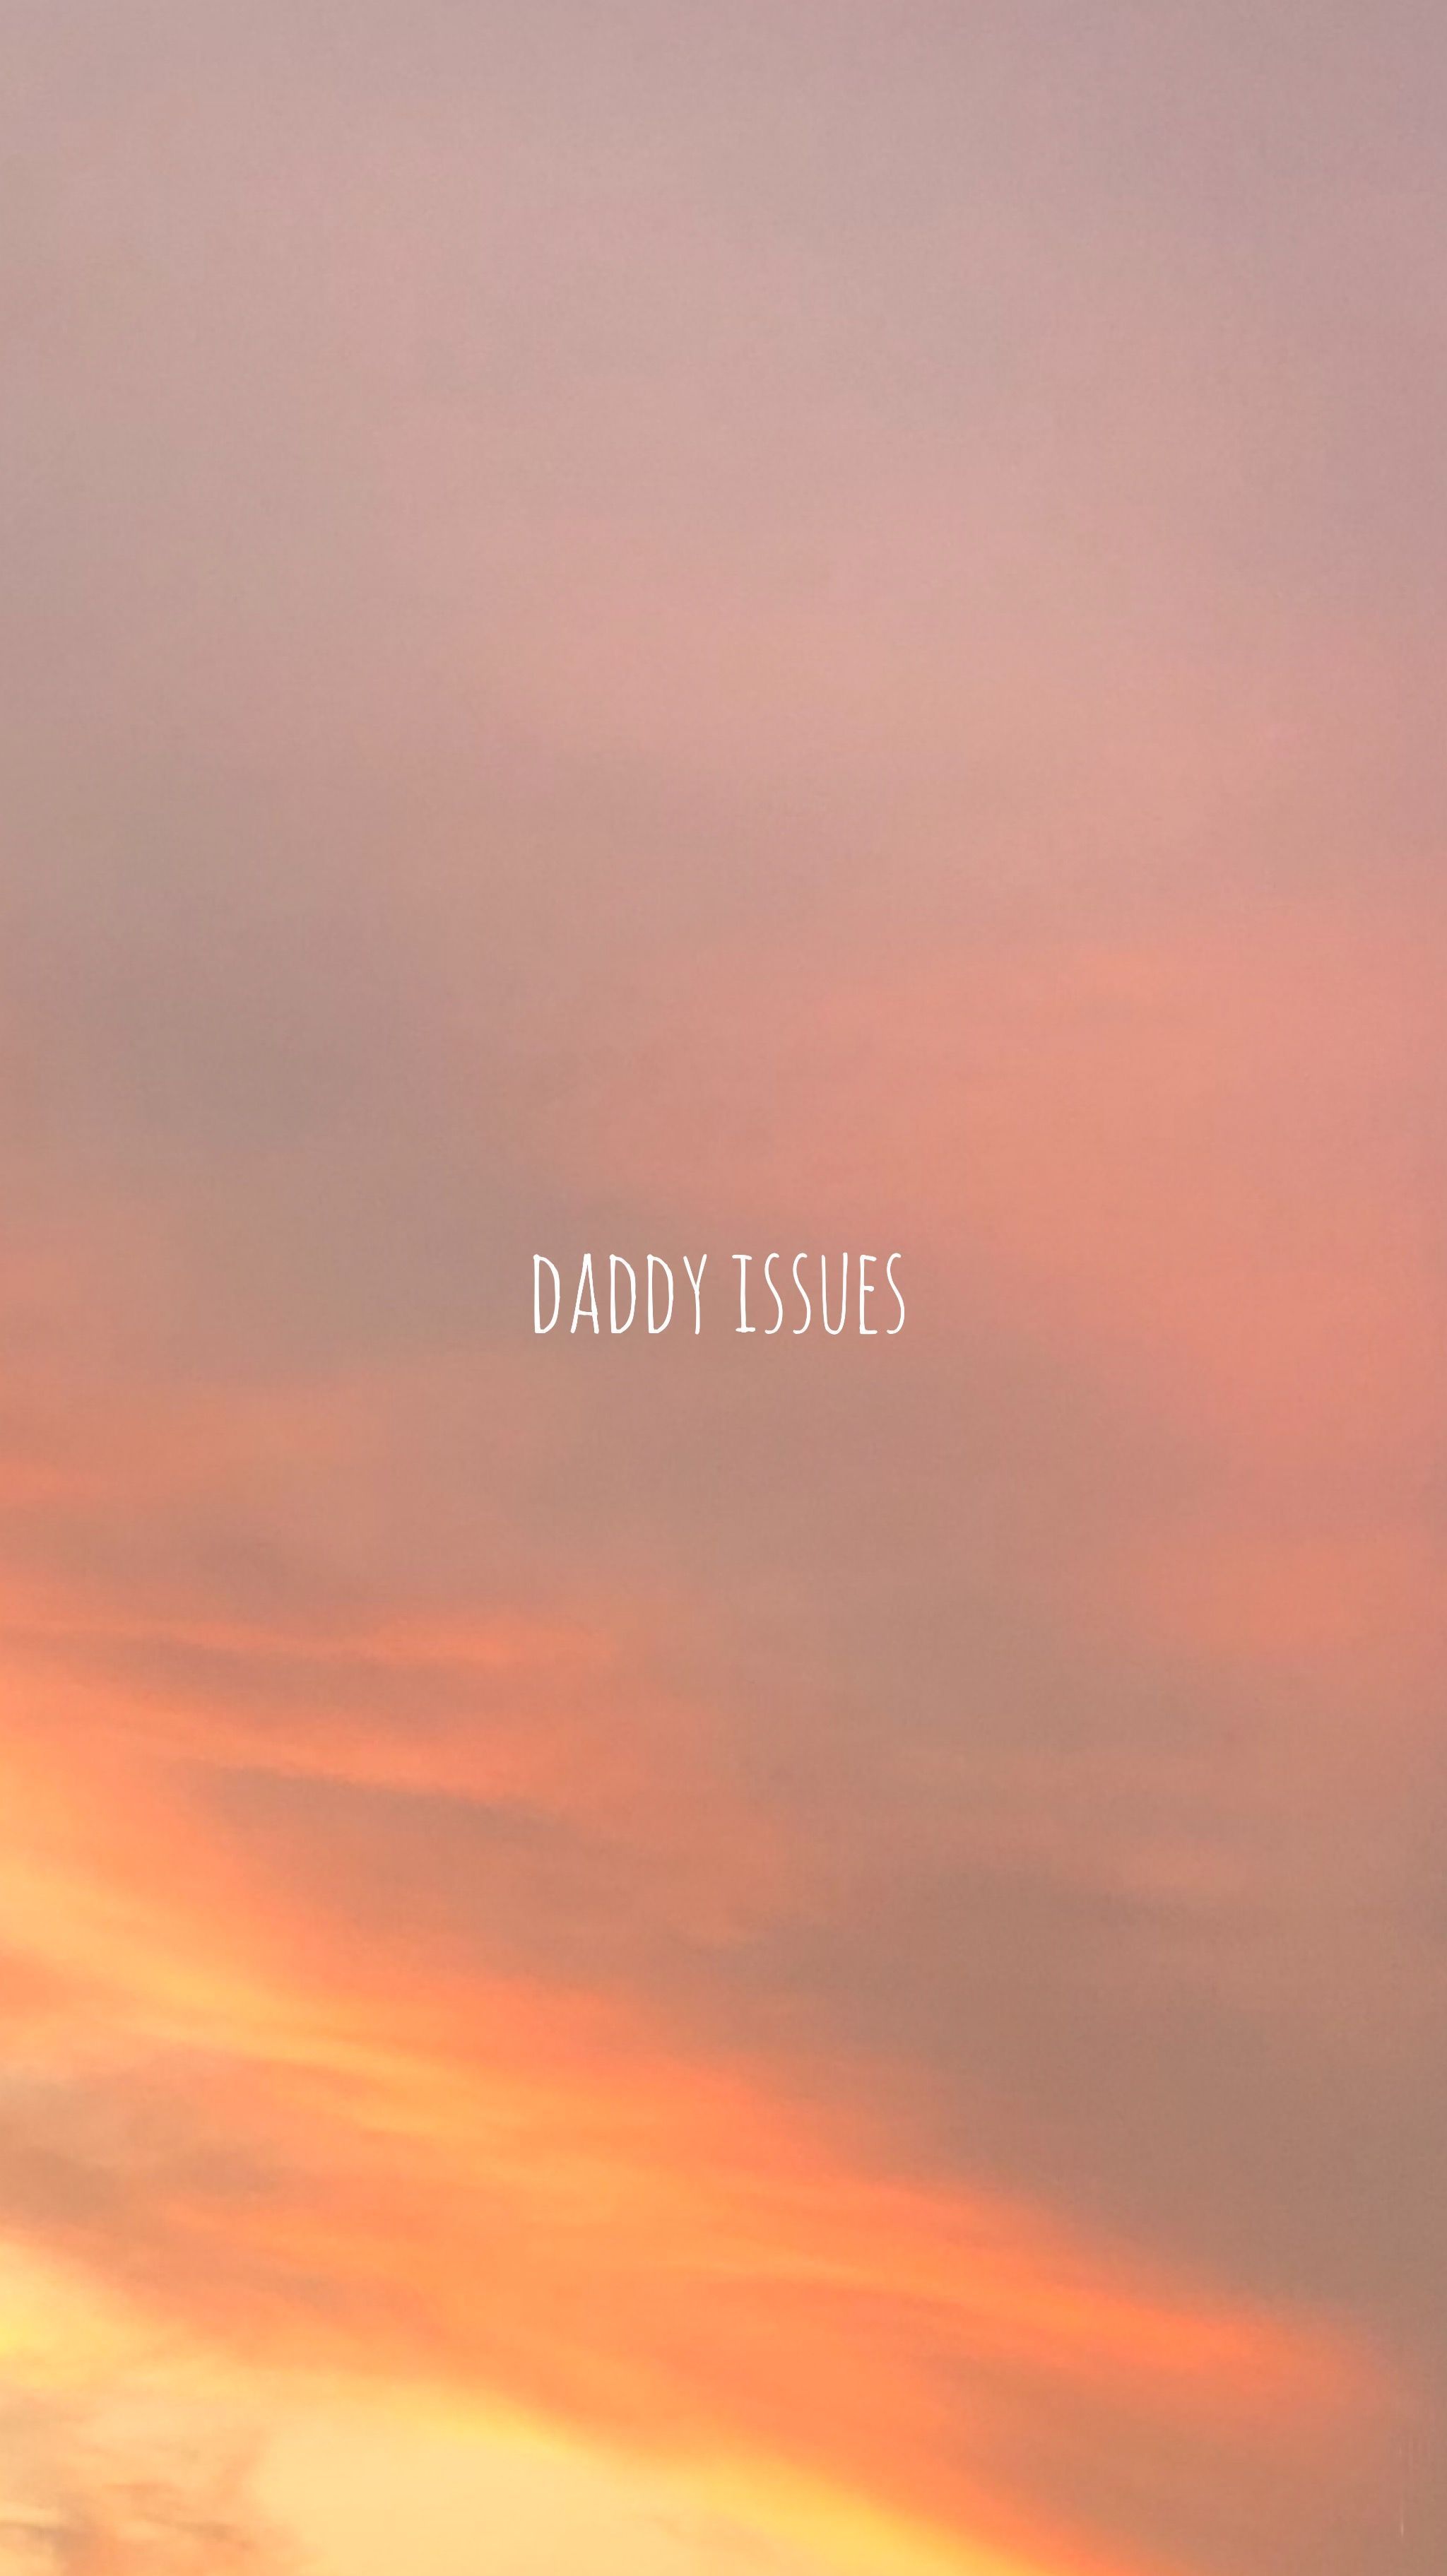 daddy issues wallpaper #ios13wallpaper #theneighbourhood #wallpaper #aesthetic #aestheticedits #aestheticphotography #iph. Daddy issues, Daddy, The neighbourhood